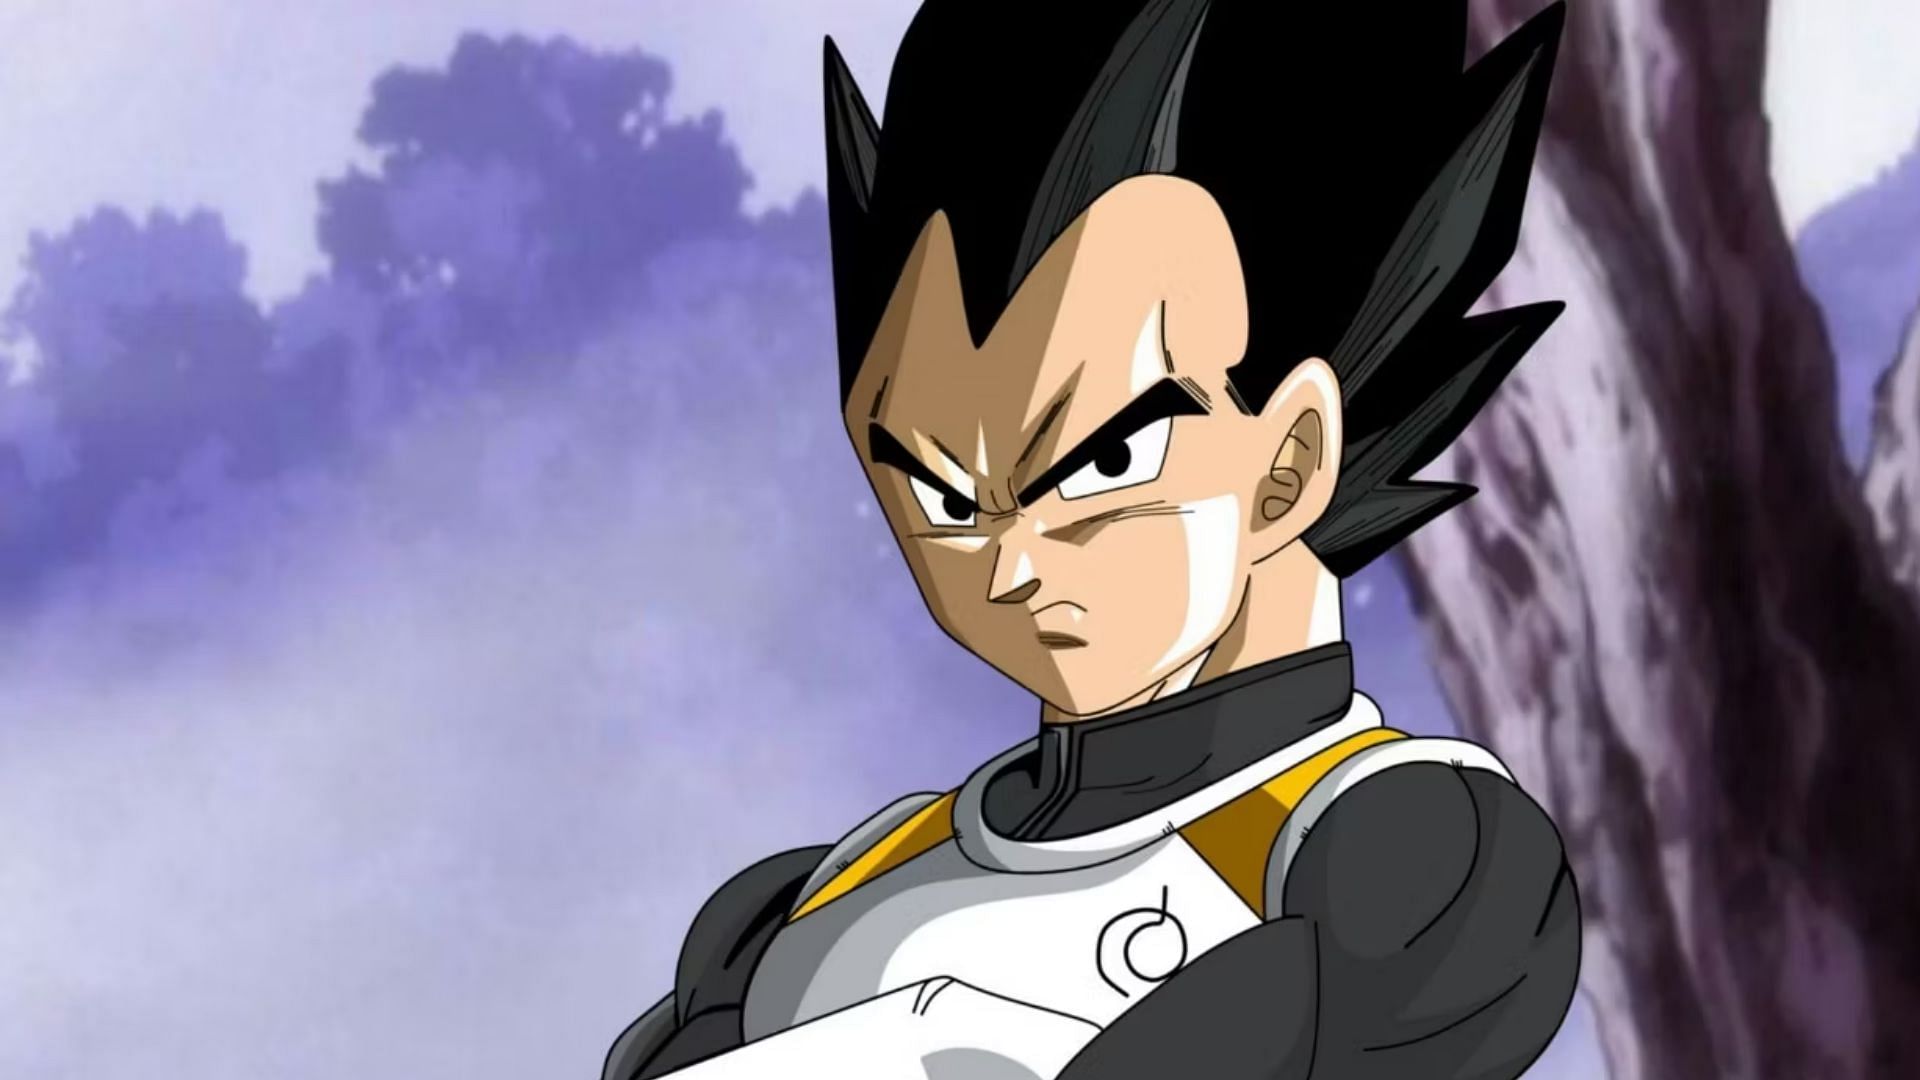 Vegeta, another rival character with spiky hair (Image via Toei Animation)